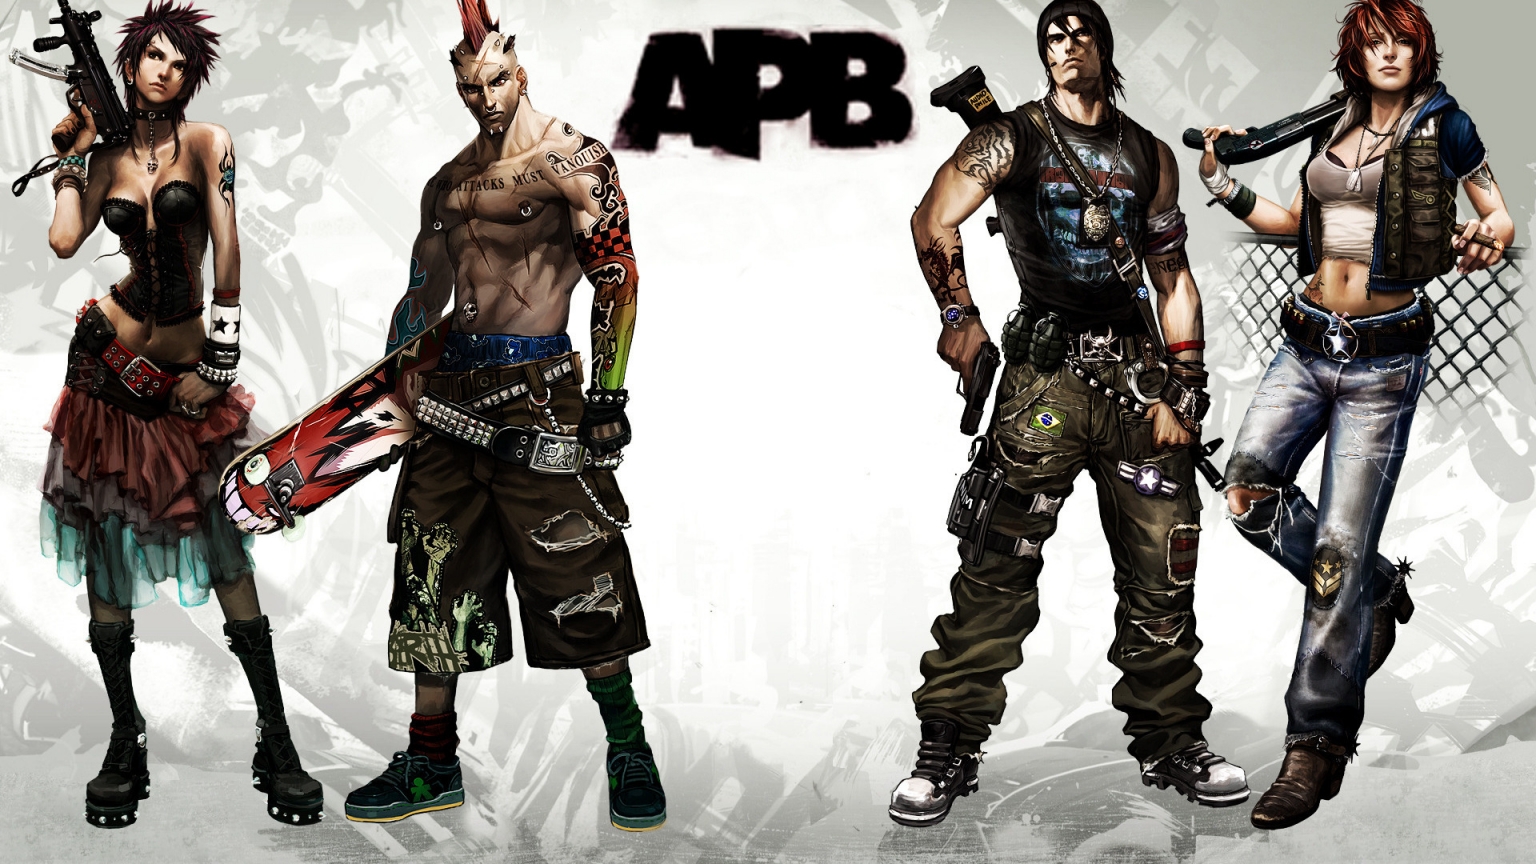 APB All Points Bulletin for 1536 x 864 HDTV resolution